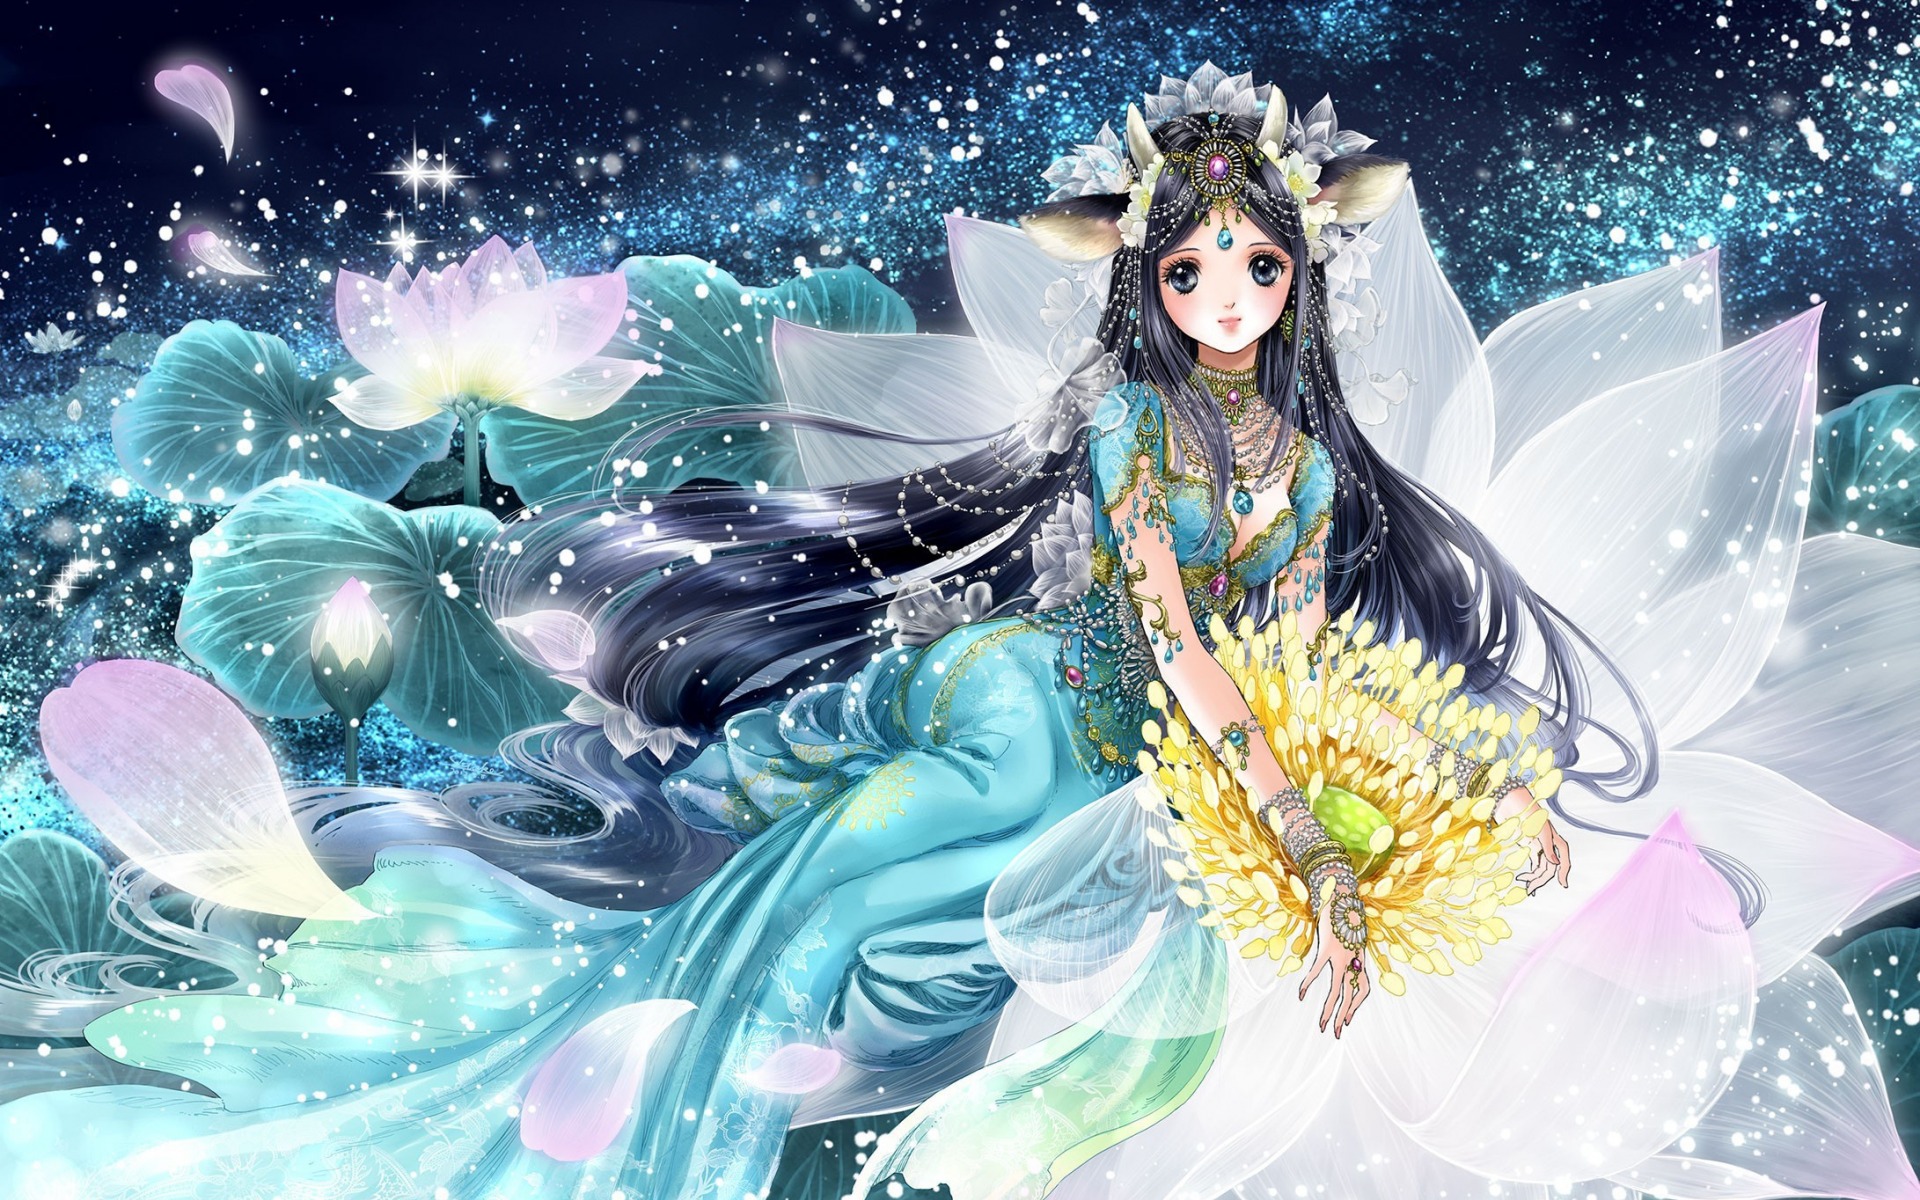 Download wallpaper female anime characters, art, Japanese manga, black long hair, green luxury dress, yellow flower for desktop with resolution 1920x1200. High Quality HD picture wallpaper